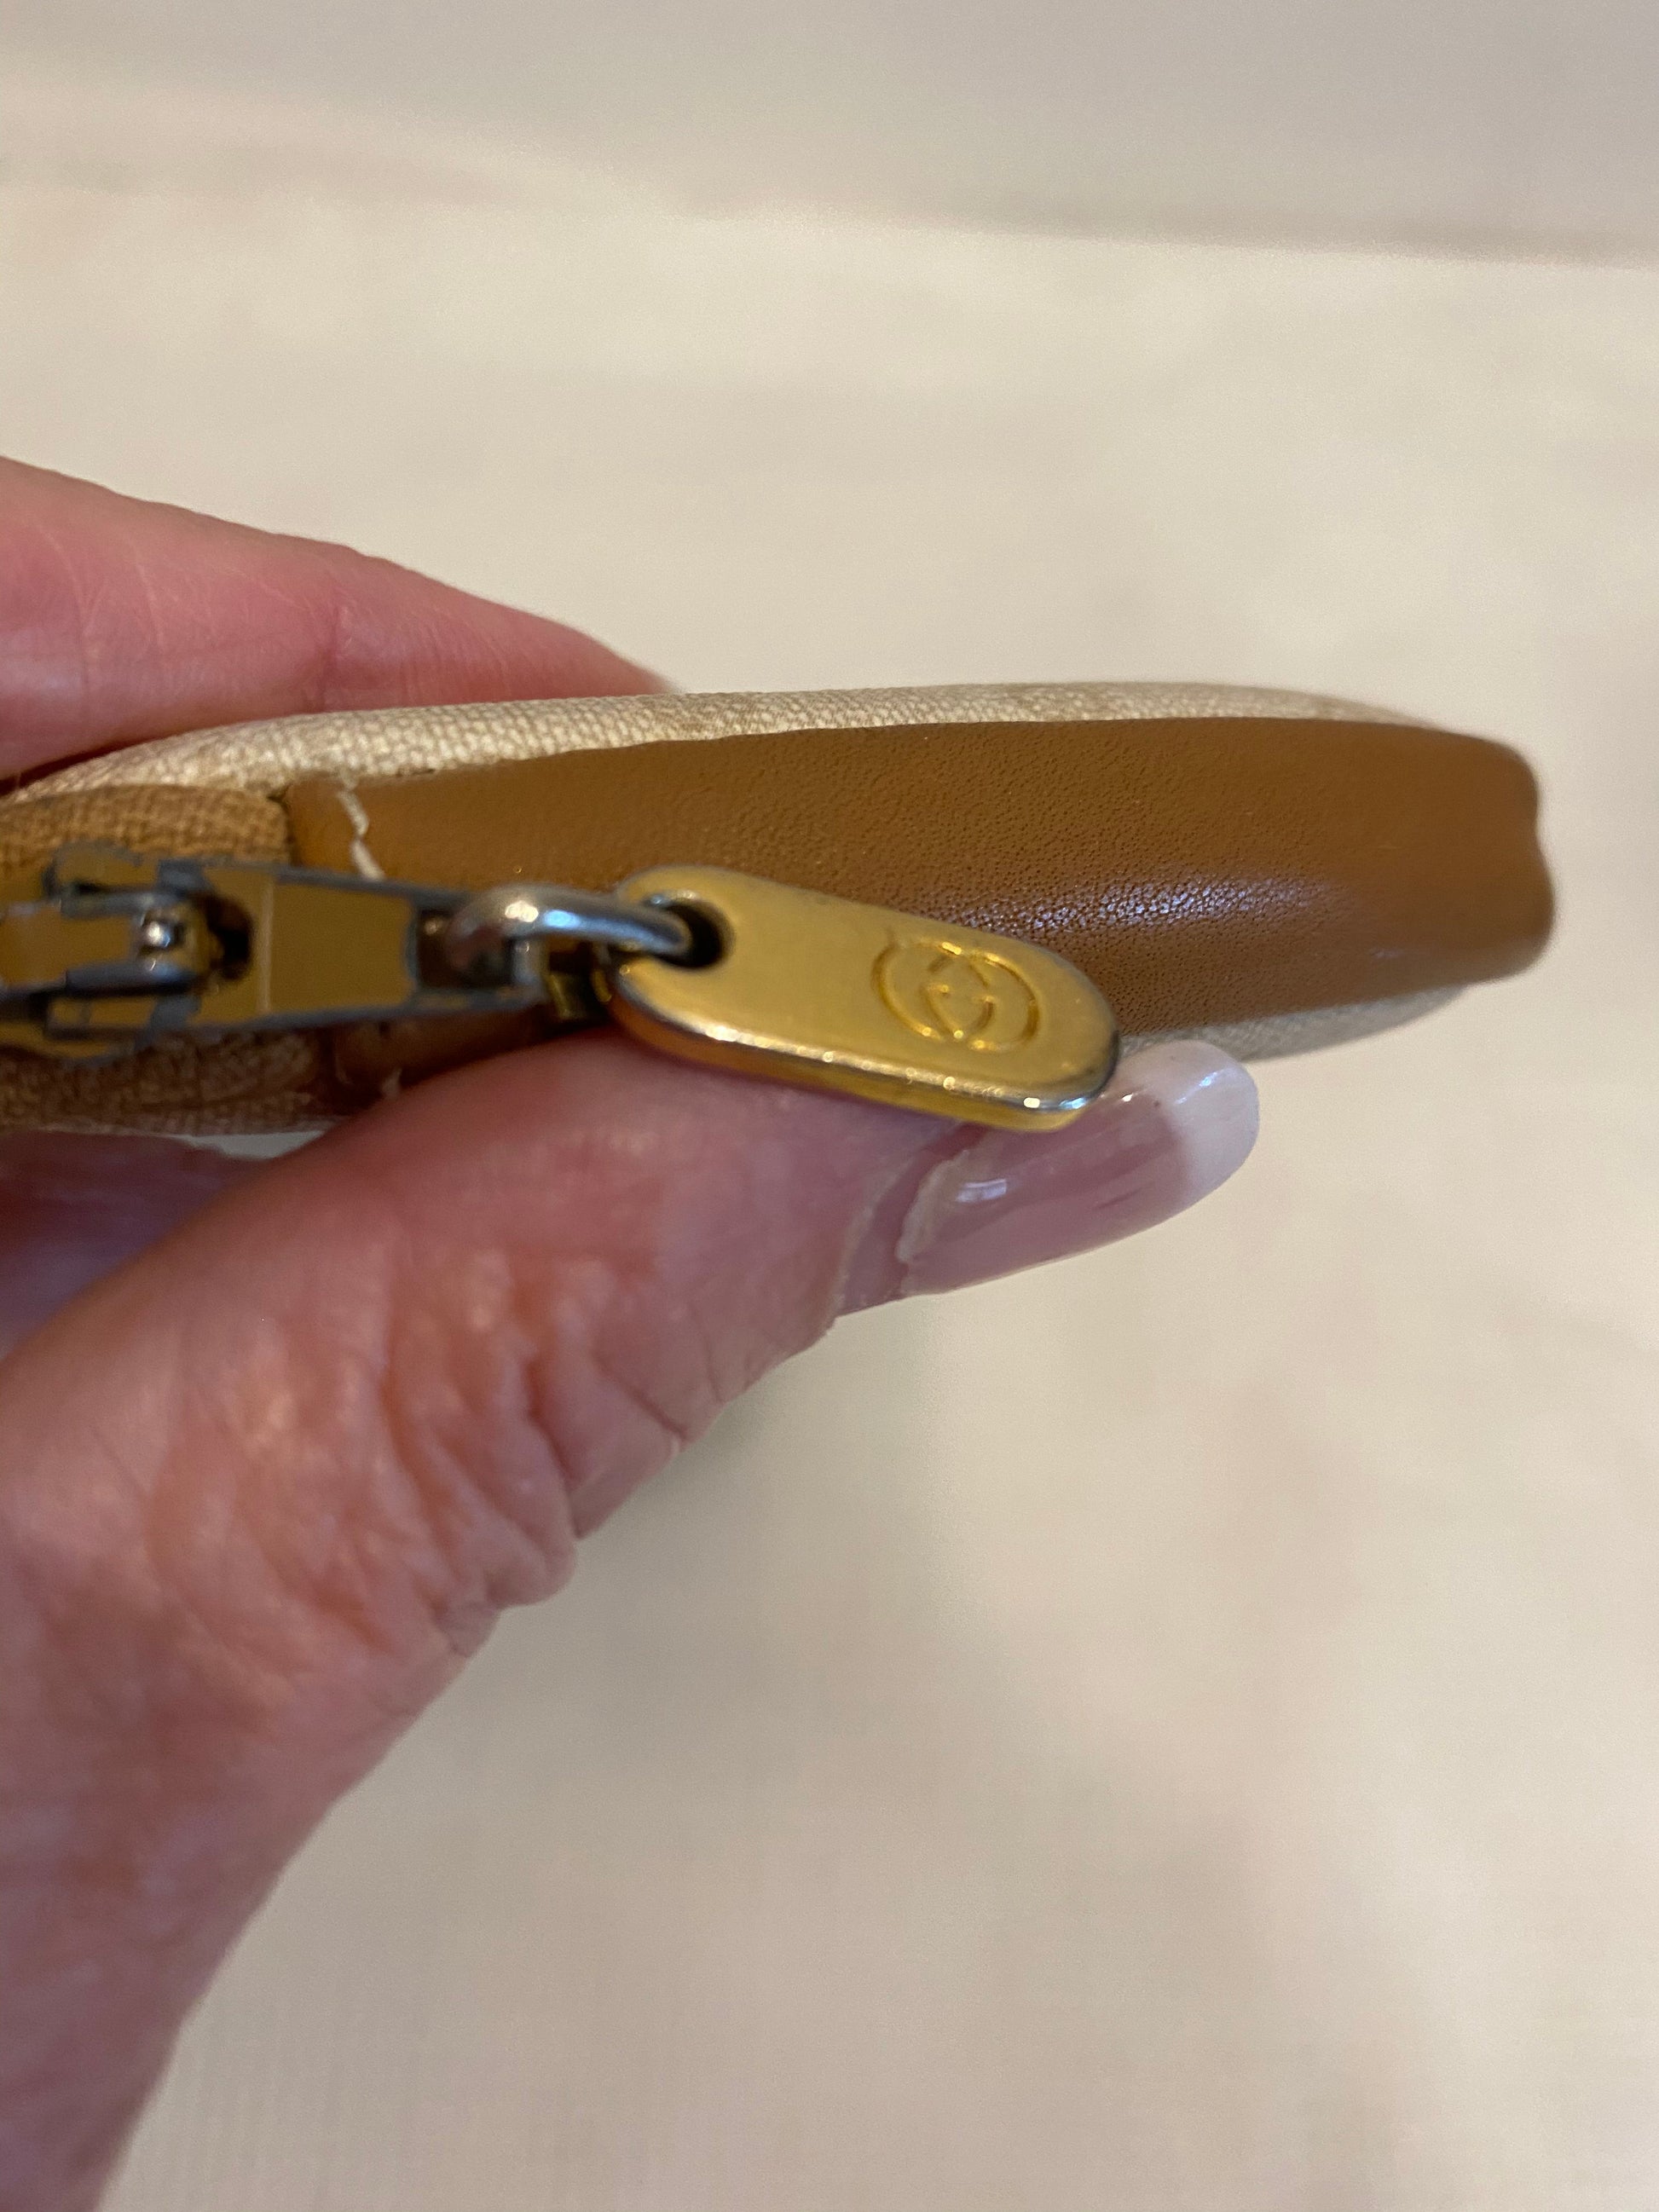 Authentic Gucci Zipper Pull and Zipper for replacement parts